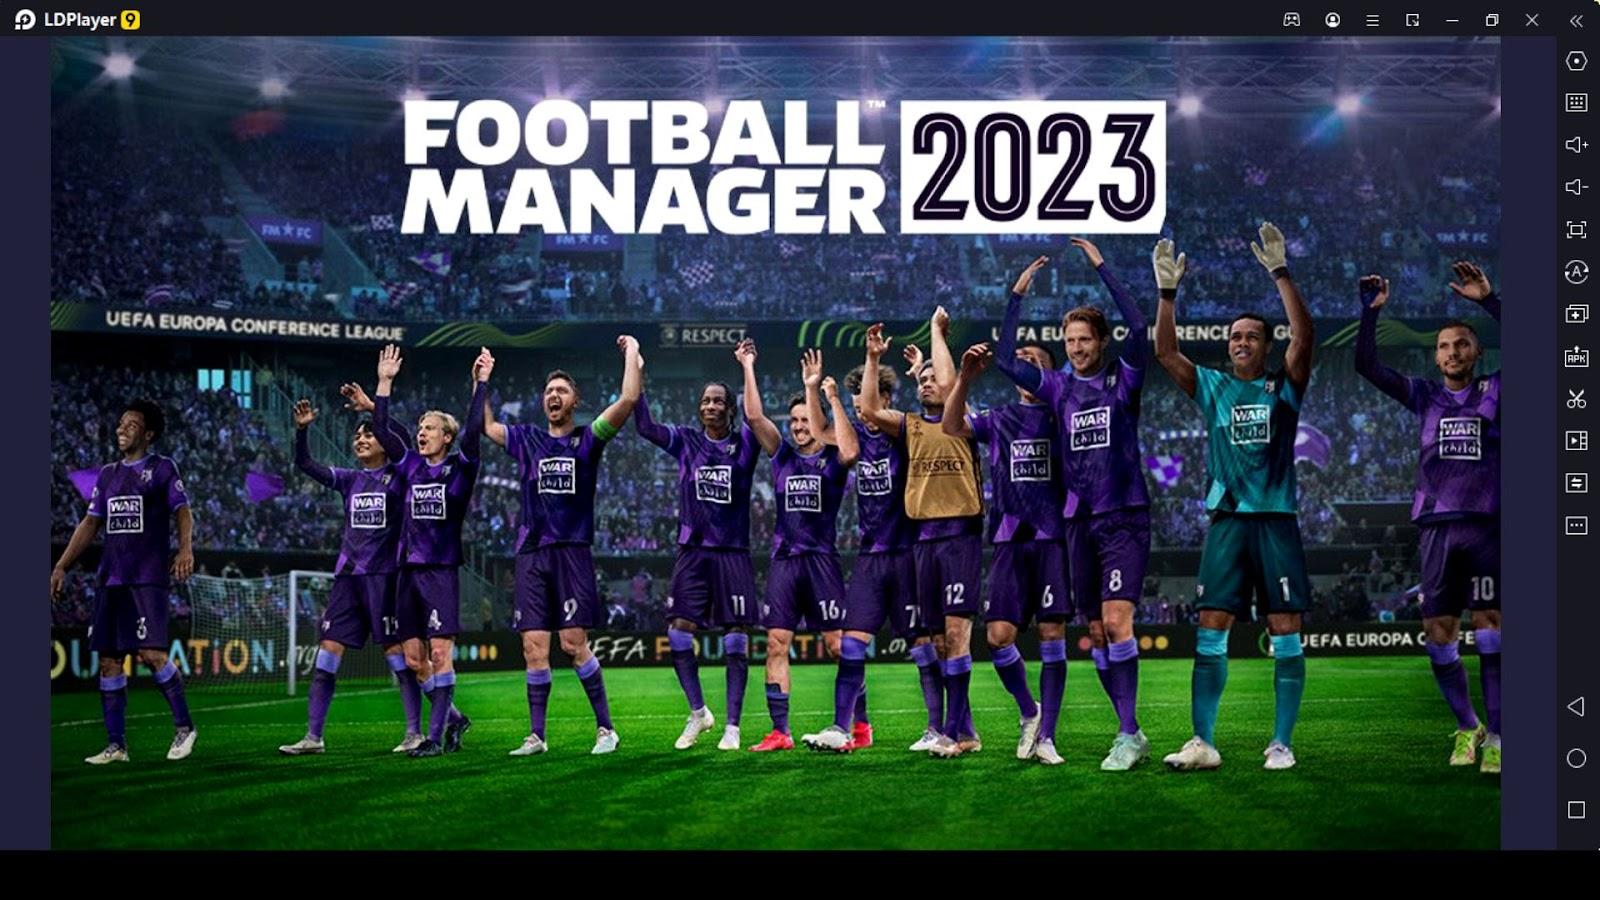 Help me create a good tactic, according to my team. - Football Manager 2023  Mobile - FMM Vibe